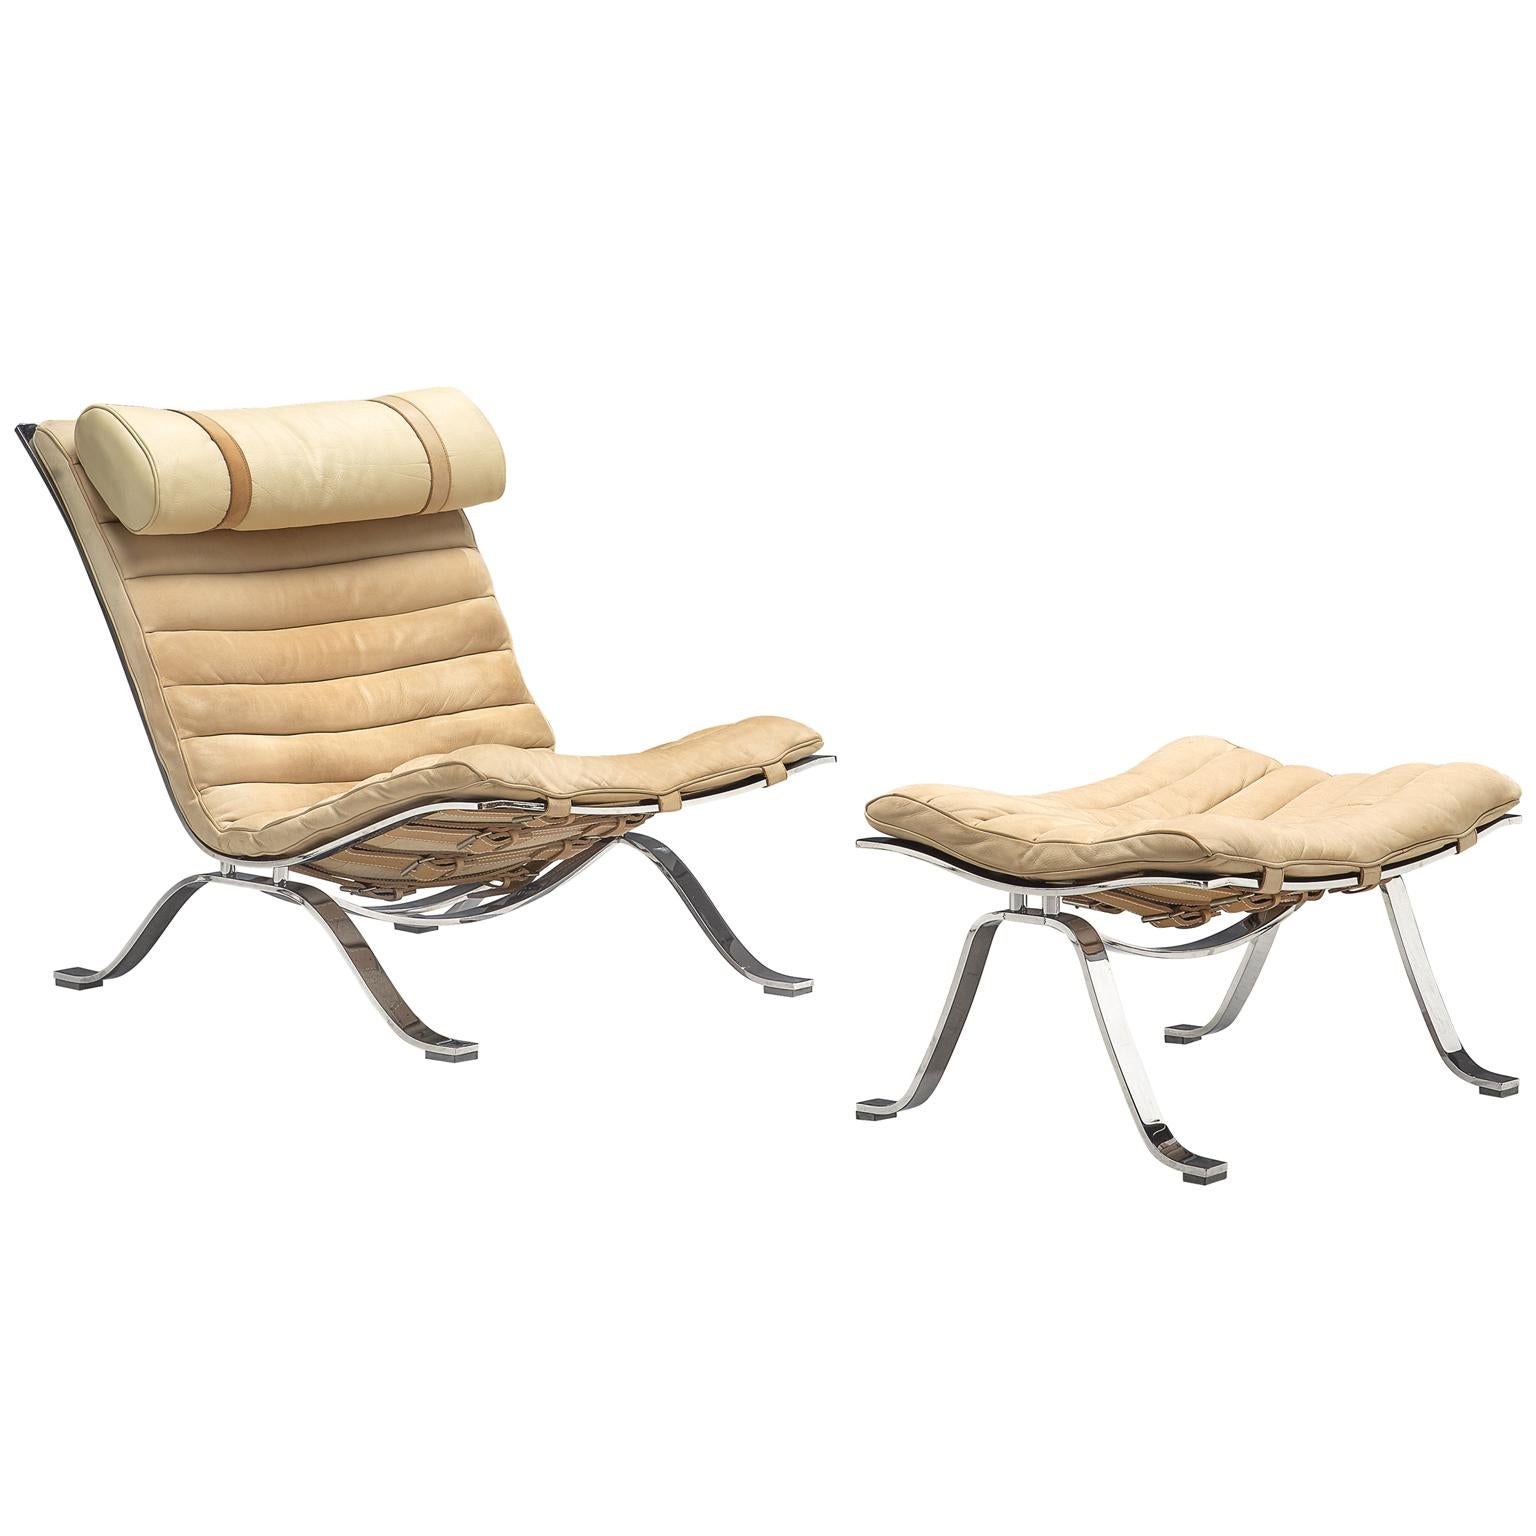 Arne Norell ' Ari' Lounge Chair and Ottoman in Leather